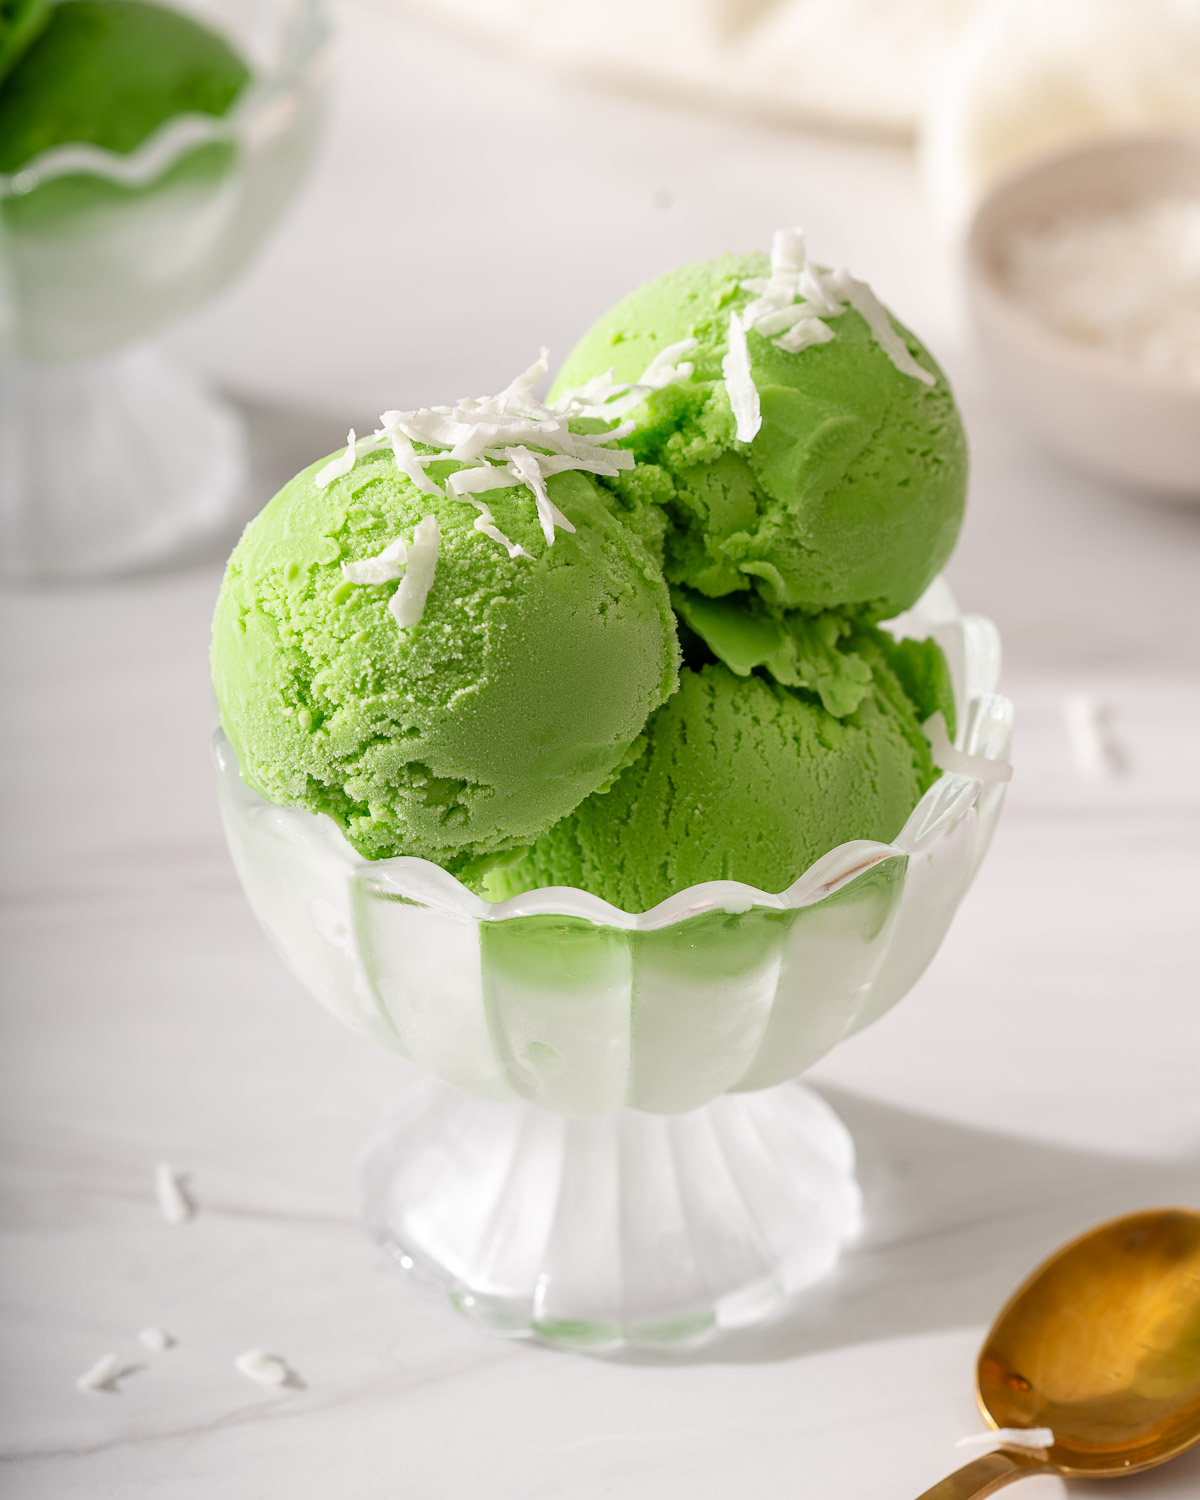 A few scoops of pandan ice cream in a small serving bowl.